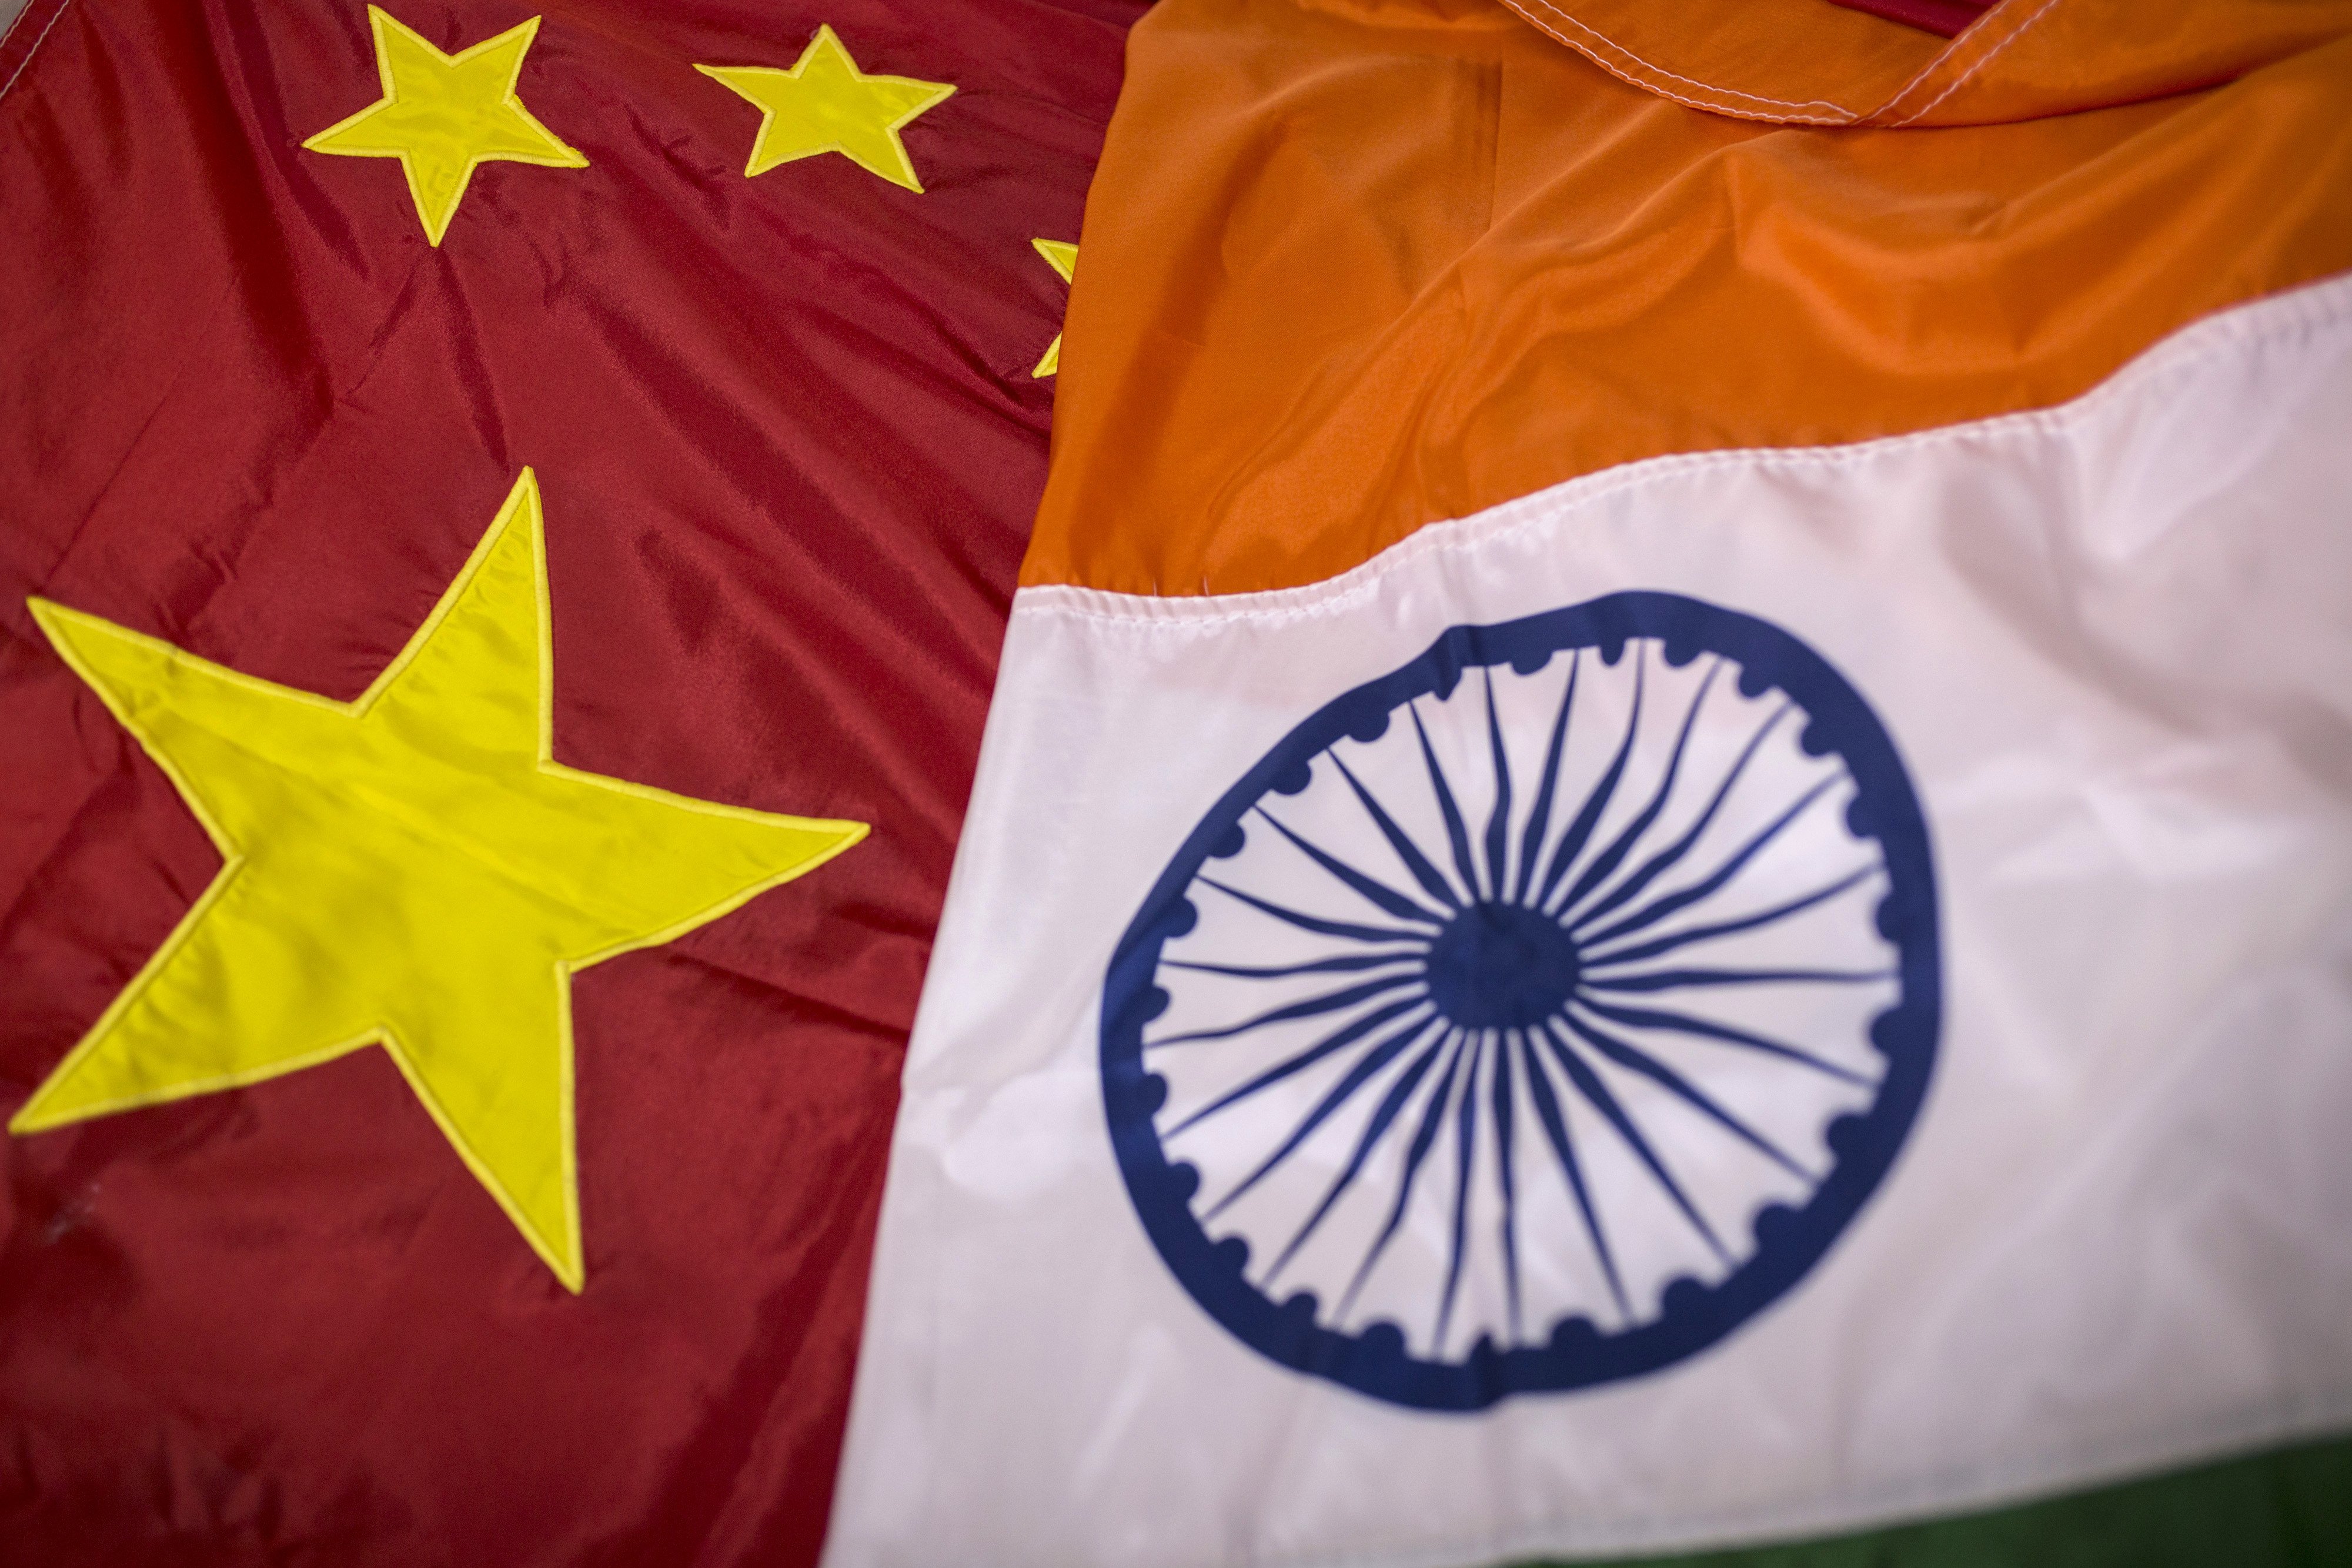 An expected – but unconfirmed – visit by Foreign Minister Wang Yi to India would be the first by a senior Chinese government official since a border skirmish between troops in June 2020. Photo: Bloomberg